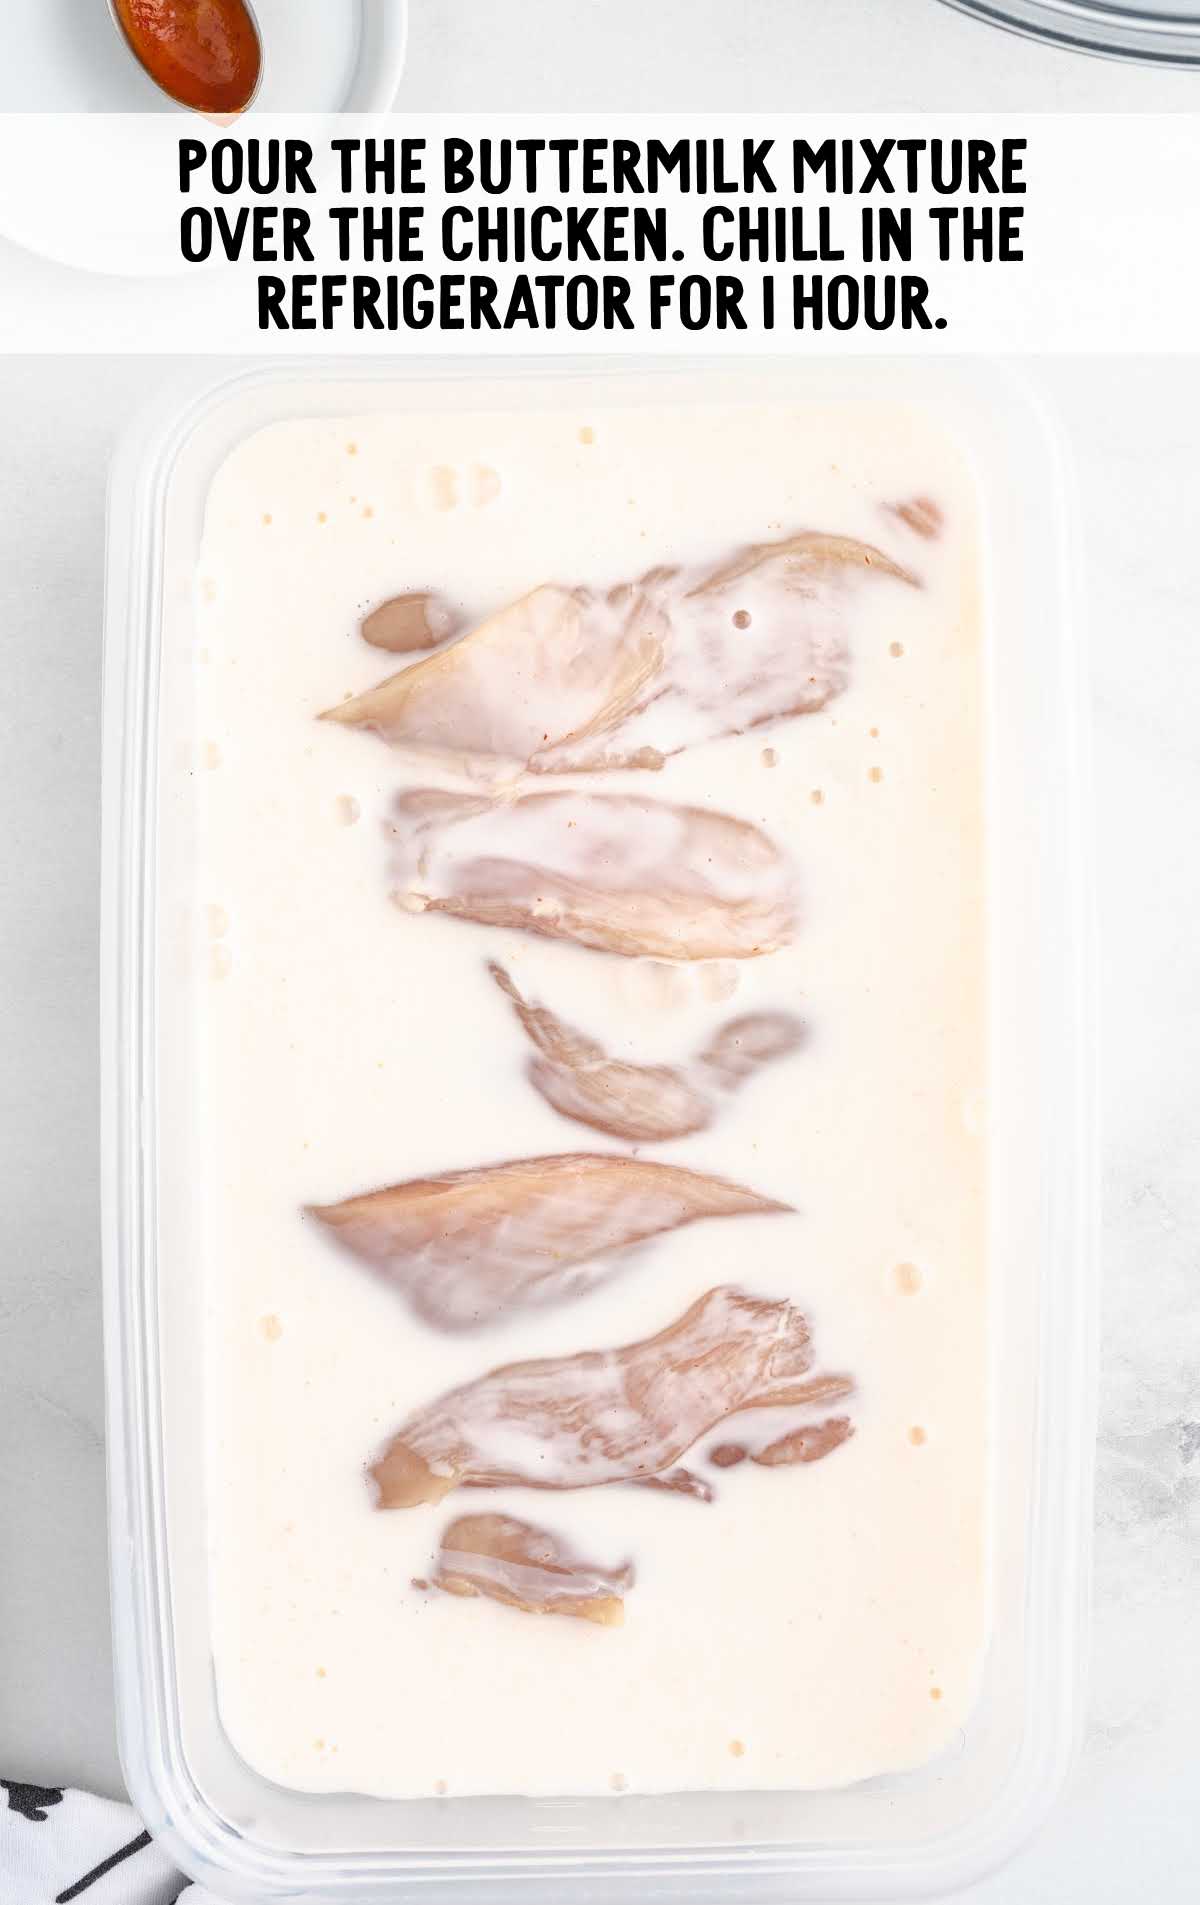 pieces of chicken in a container of buttermilk mixture